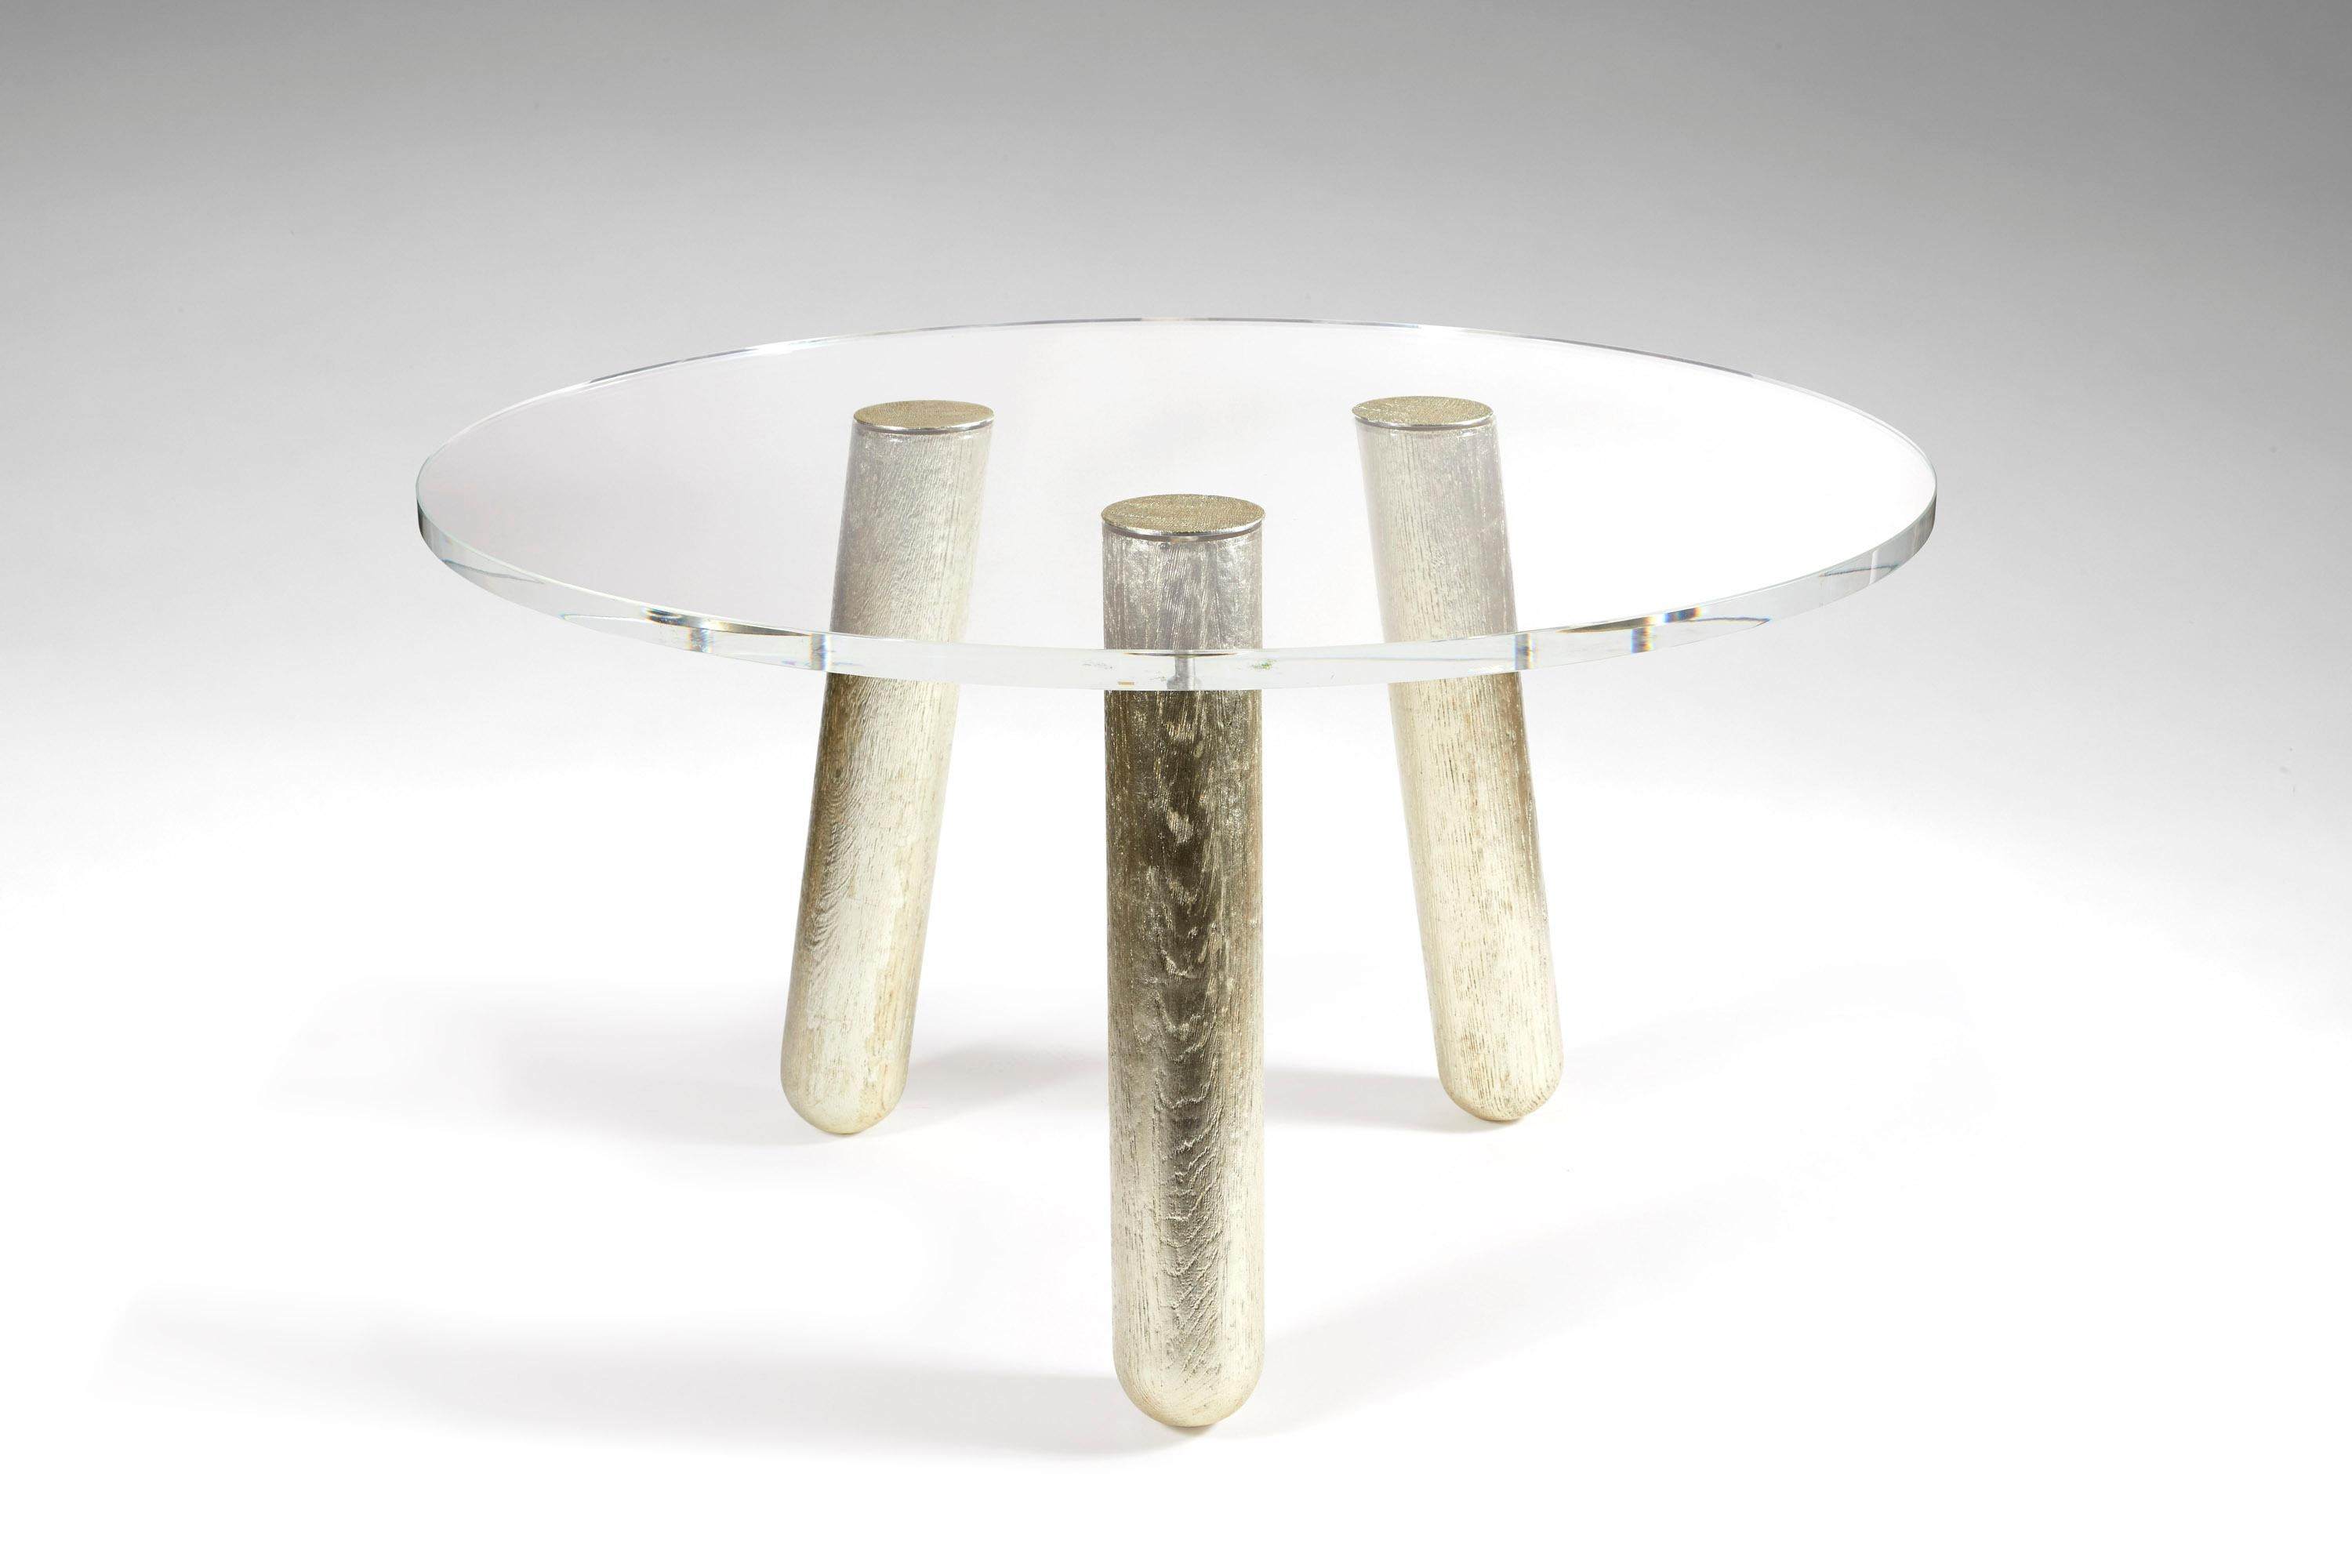 Tutti Frutti.
Round dining table. 
Cat-Berro edition 2008
Top in transparent acrylic. 
Legs in sanded oak covered with colored varnished aluminium leaves or golden leaves.
O 51’’. H 29 ½ ’’.
O 130cm. H 75cm.

Signed piece of a limited edition of 8 +